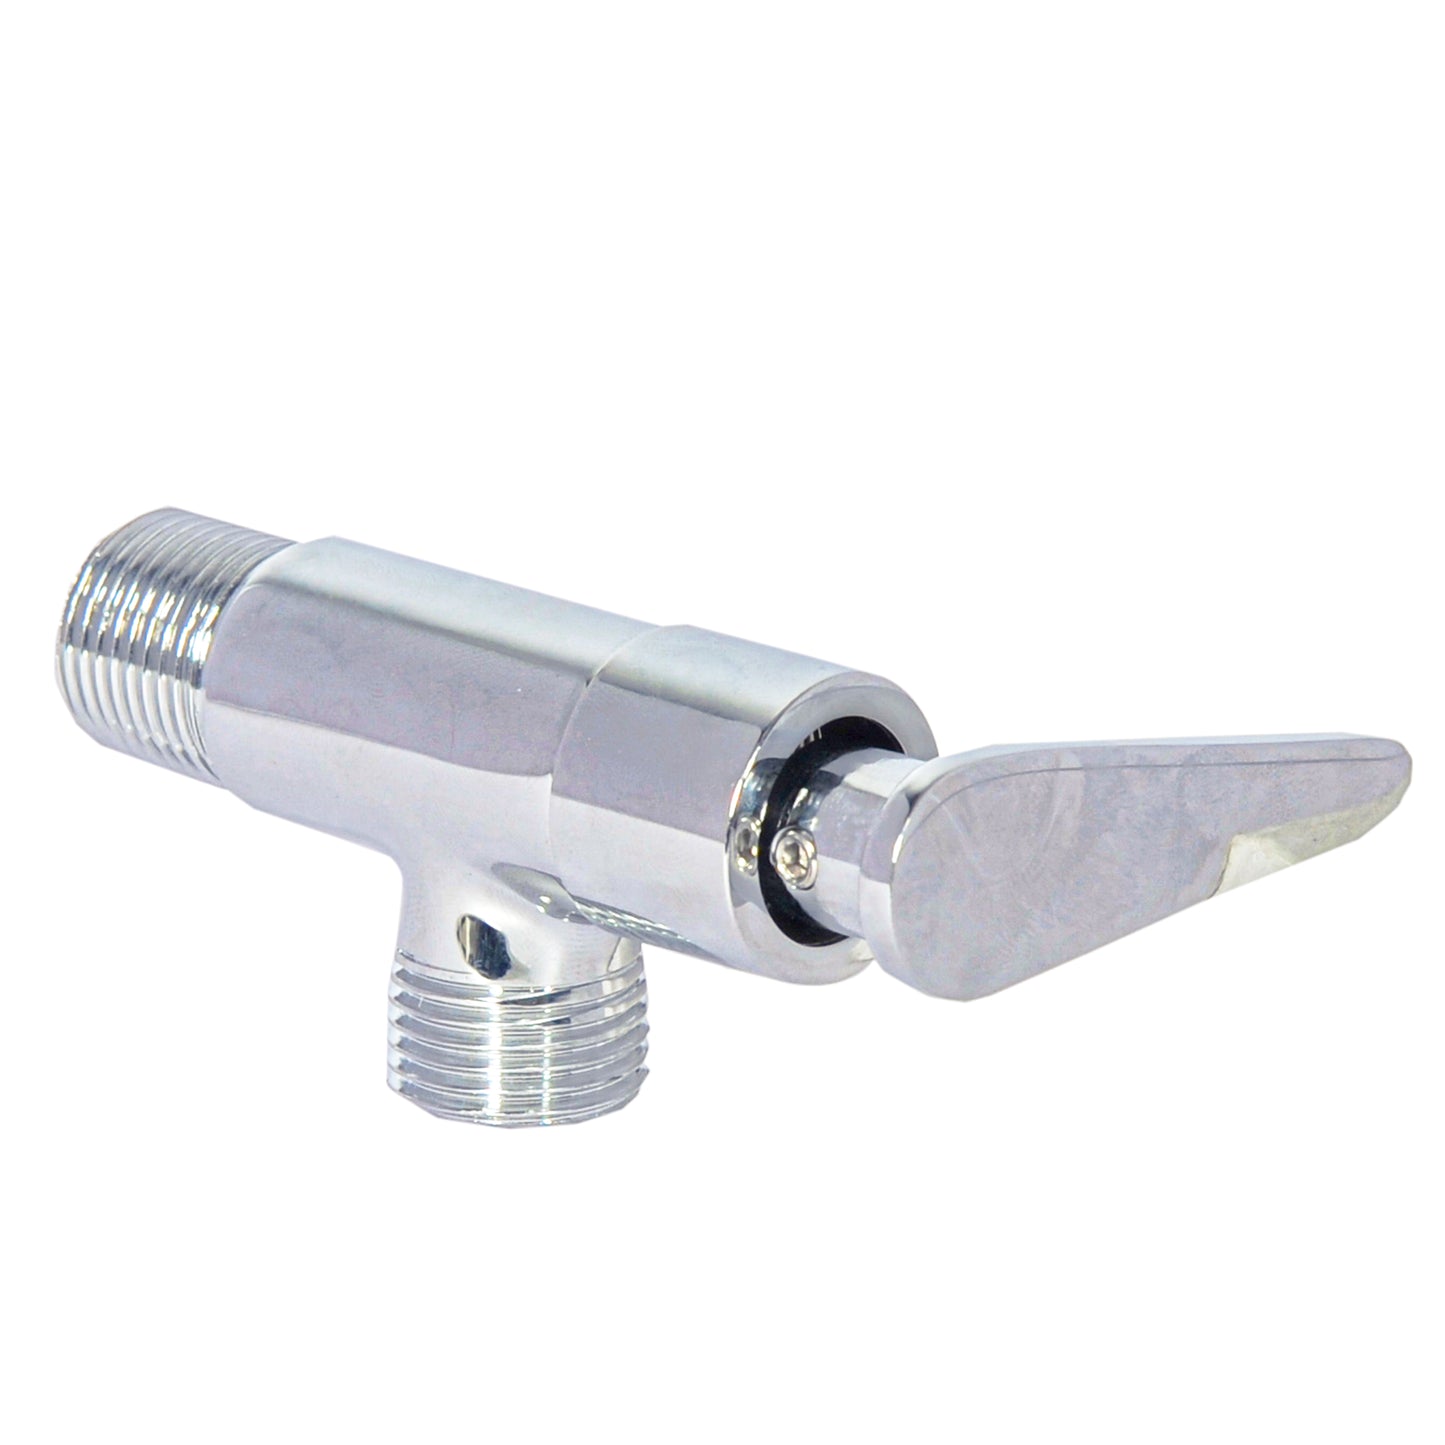 AC-01 Angle Cock tap for Bathroom, Kitchen, washbasin, tap faucets with Wall Flange